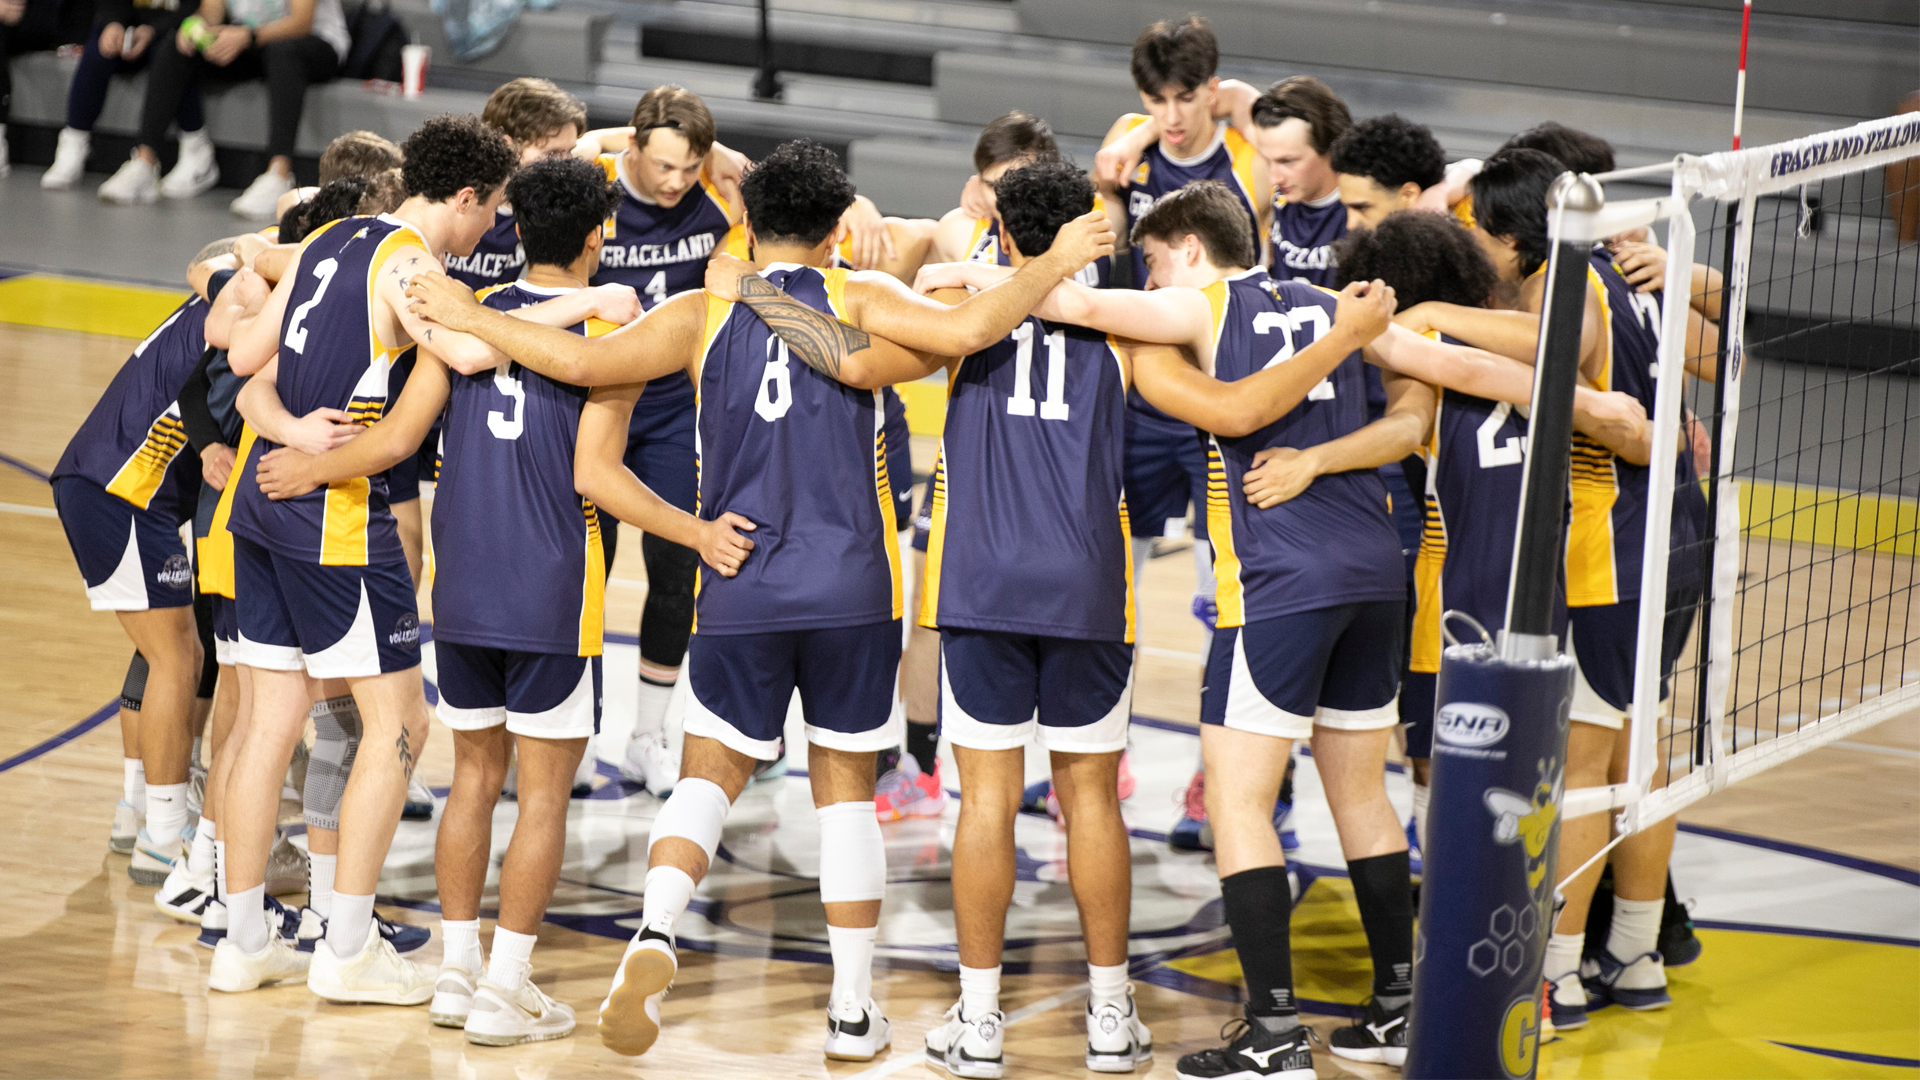 Men&rsquo;s Volleyball Held by William Penn